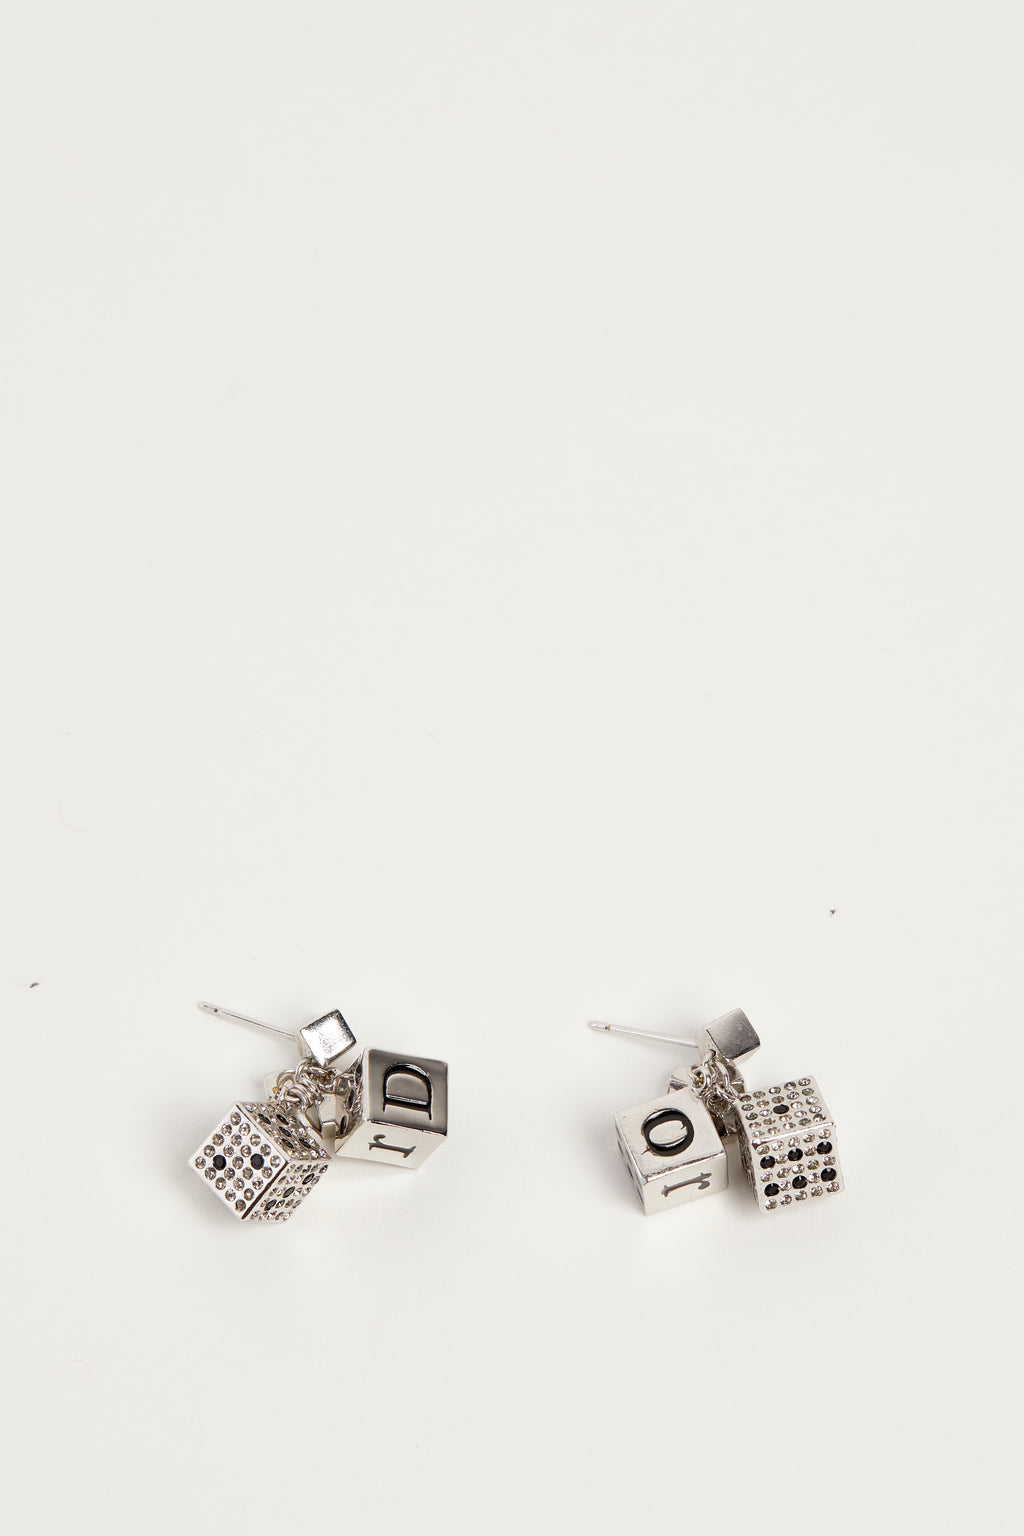 Vintage Christian Dior Silver Dice Earrings